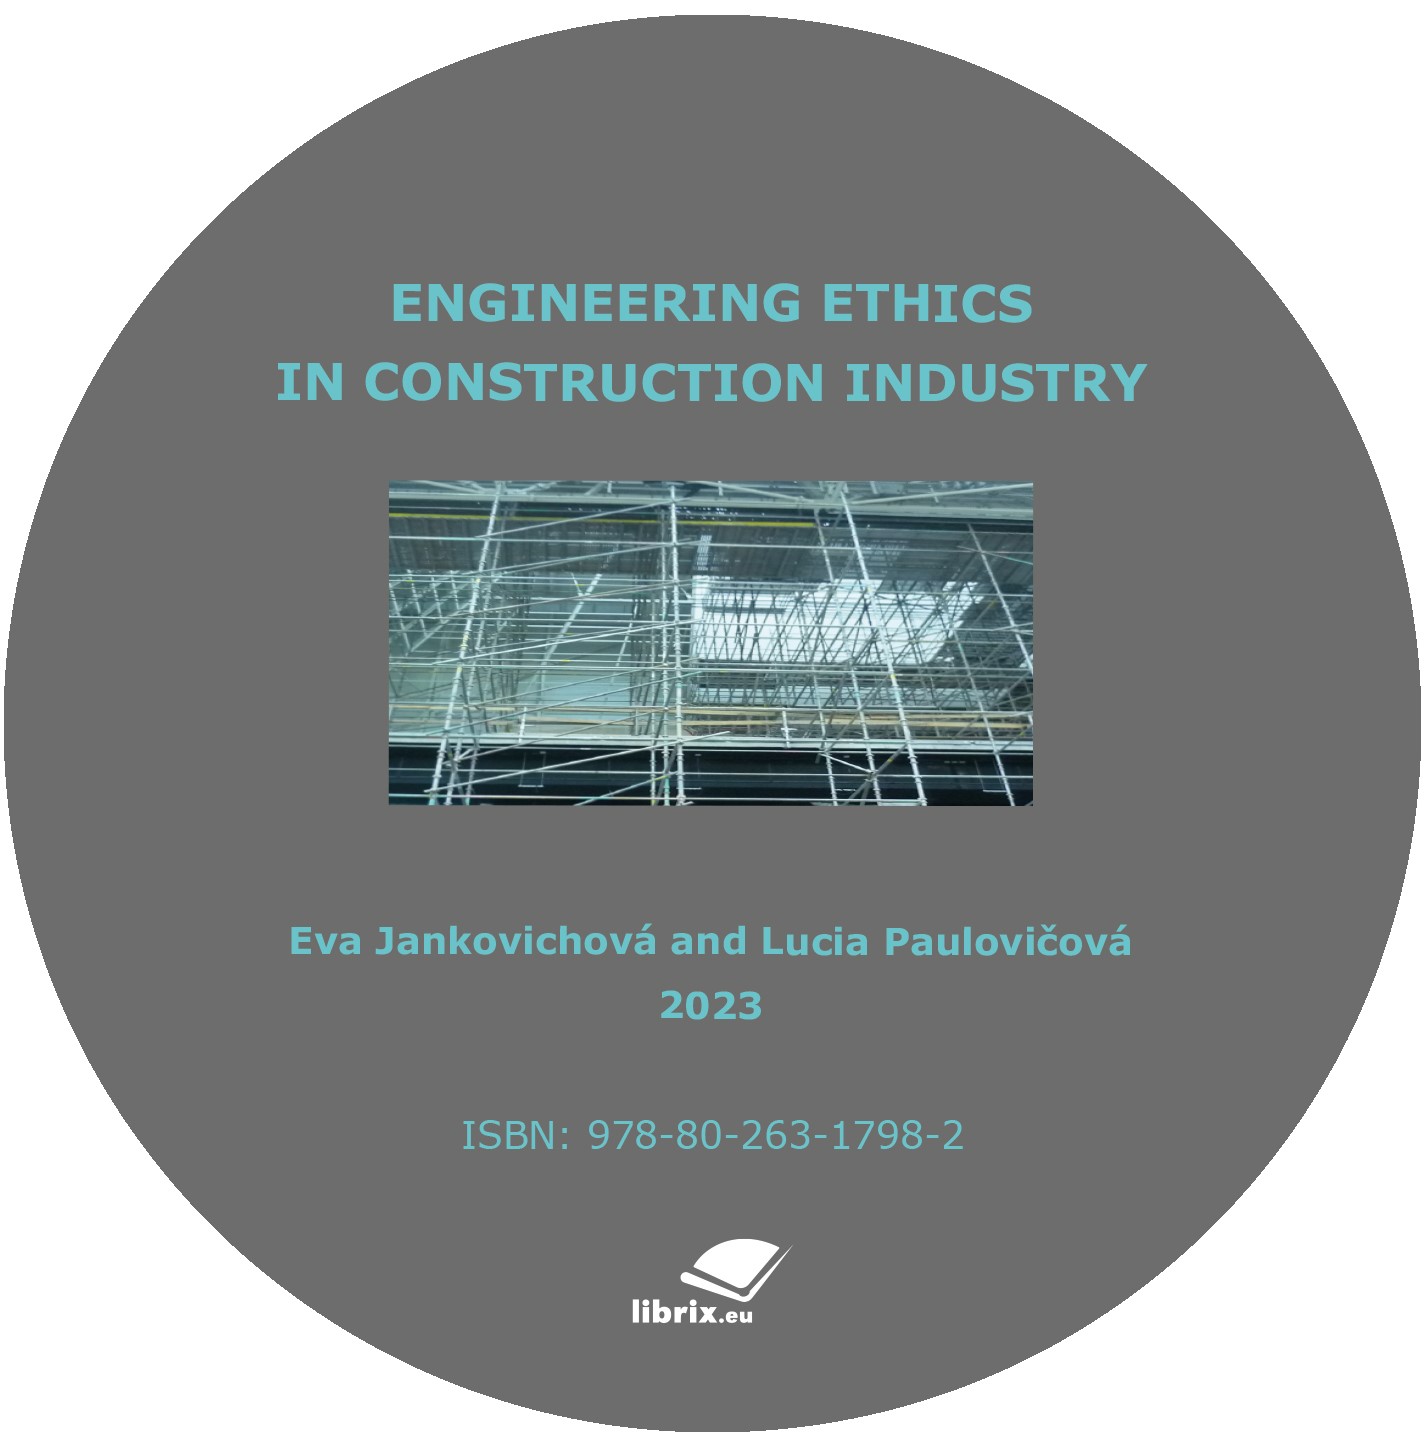 ENGINEERING ETHICS IN CONSTRUCTION INDUSTRY